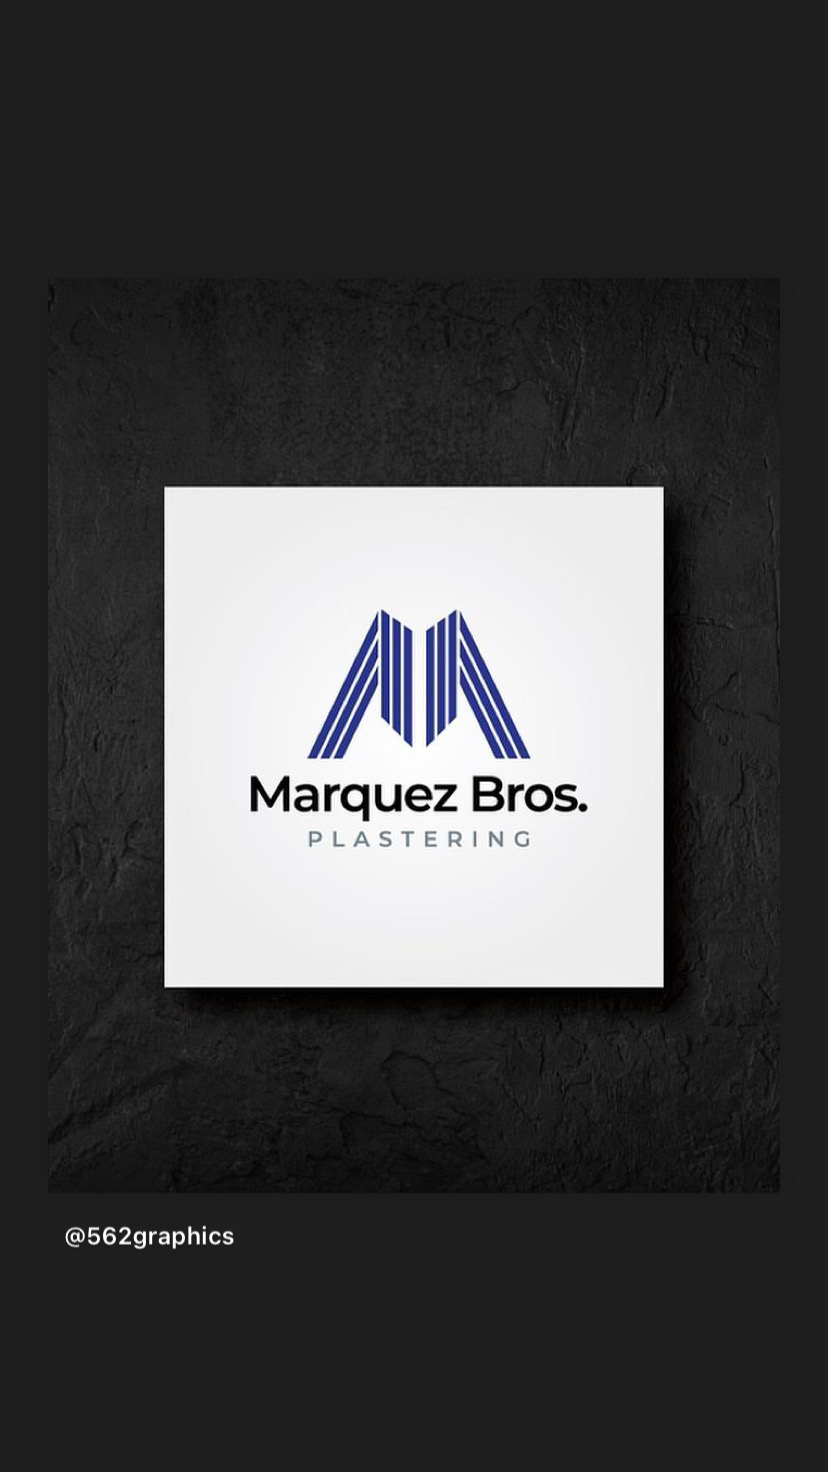 Marquez Brothers Plastering Corp. Logo